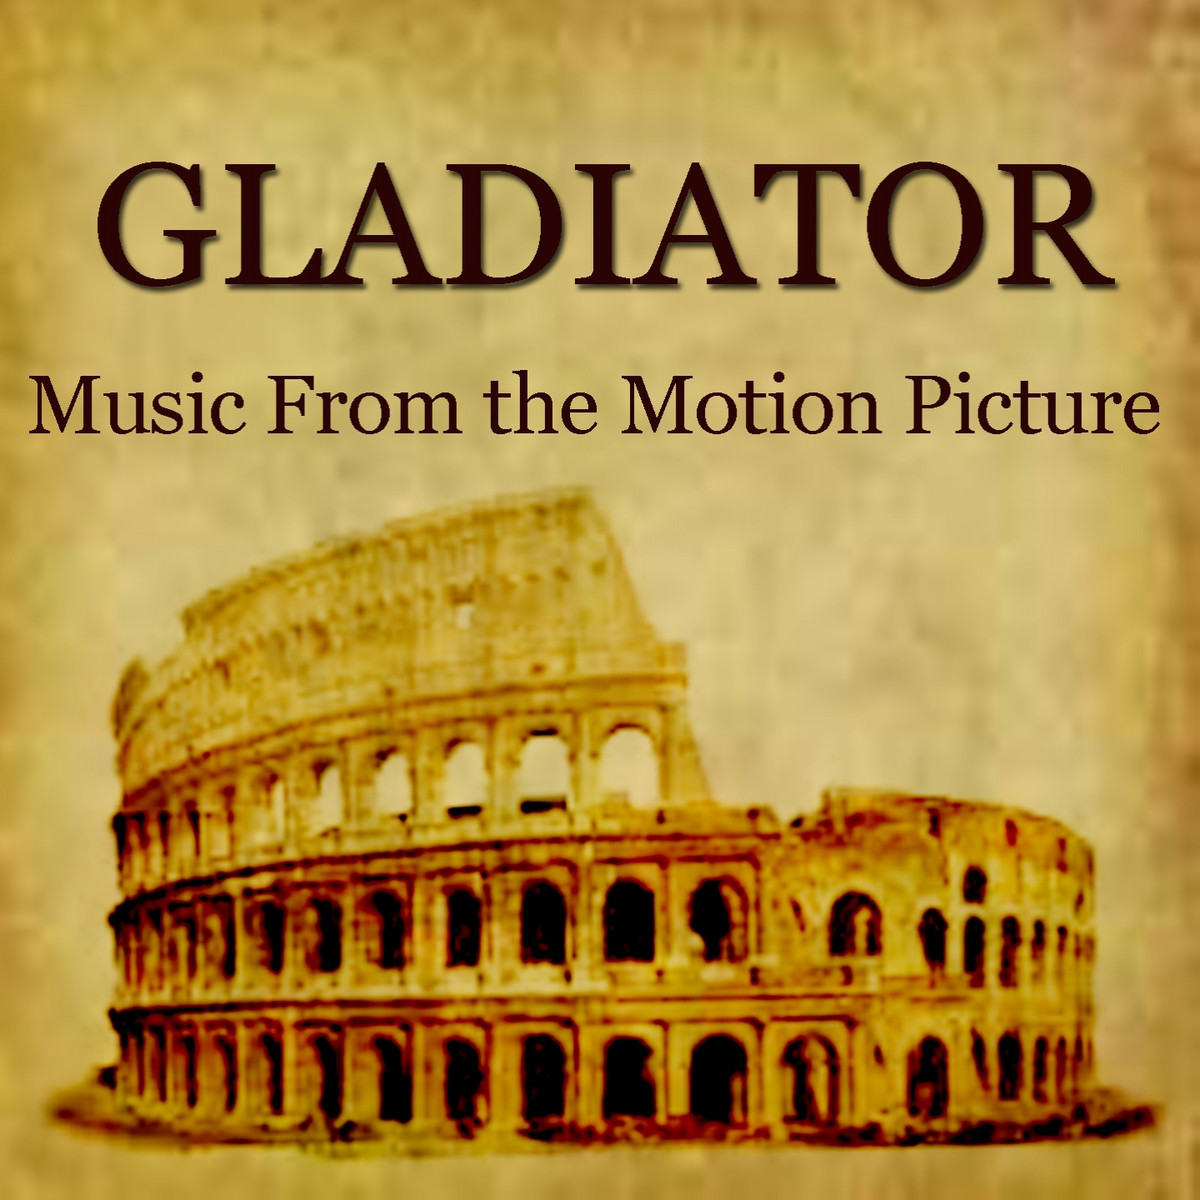 Gladiator Theme. Гладиатор музыка. Gladiator Cover. Gladiator (Music from the Motion picture).